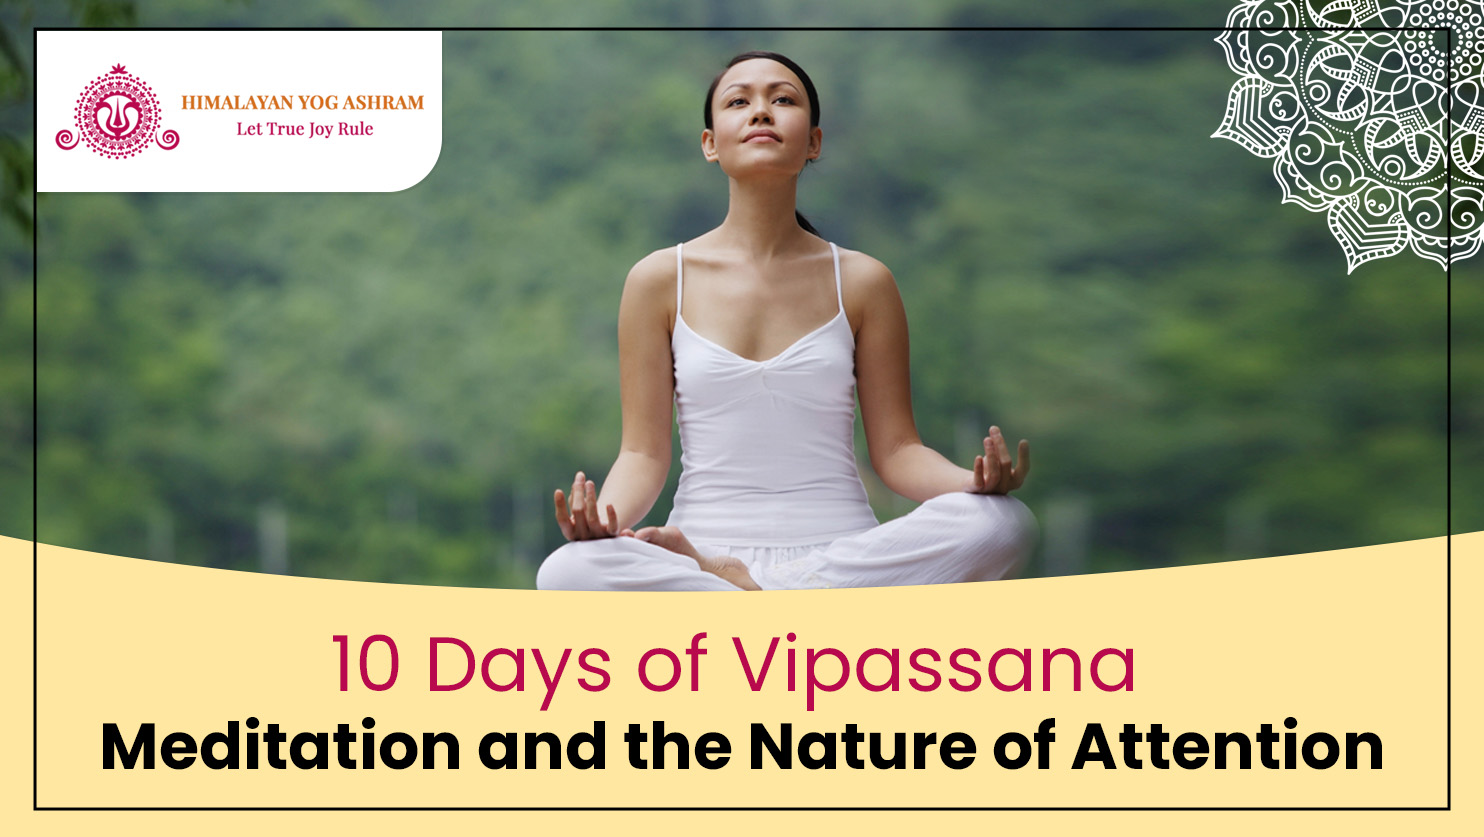 10 Days of Vipassana: Meditation and the Nature of Attention